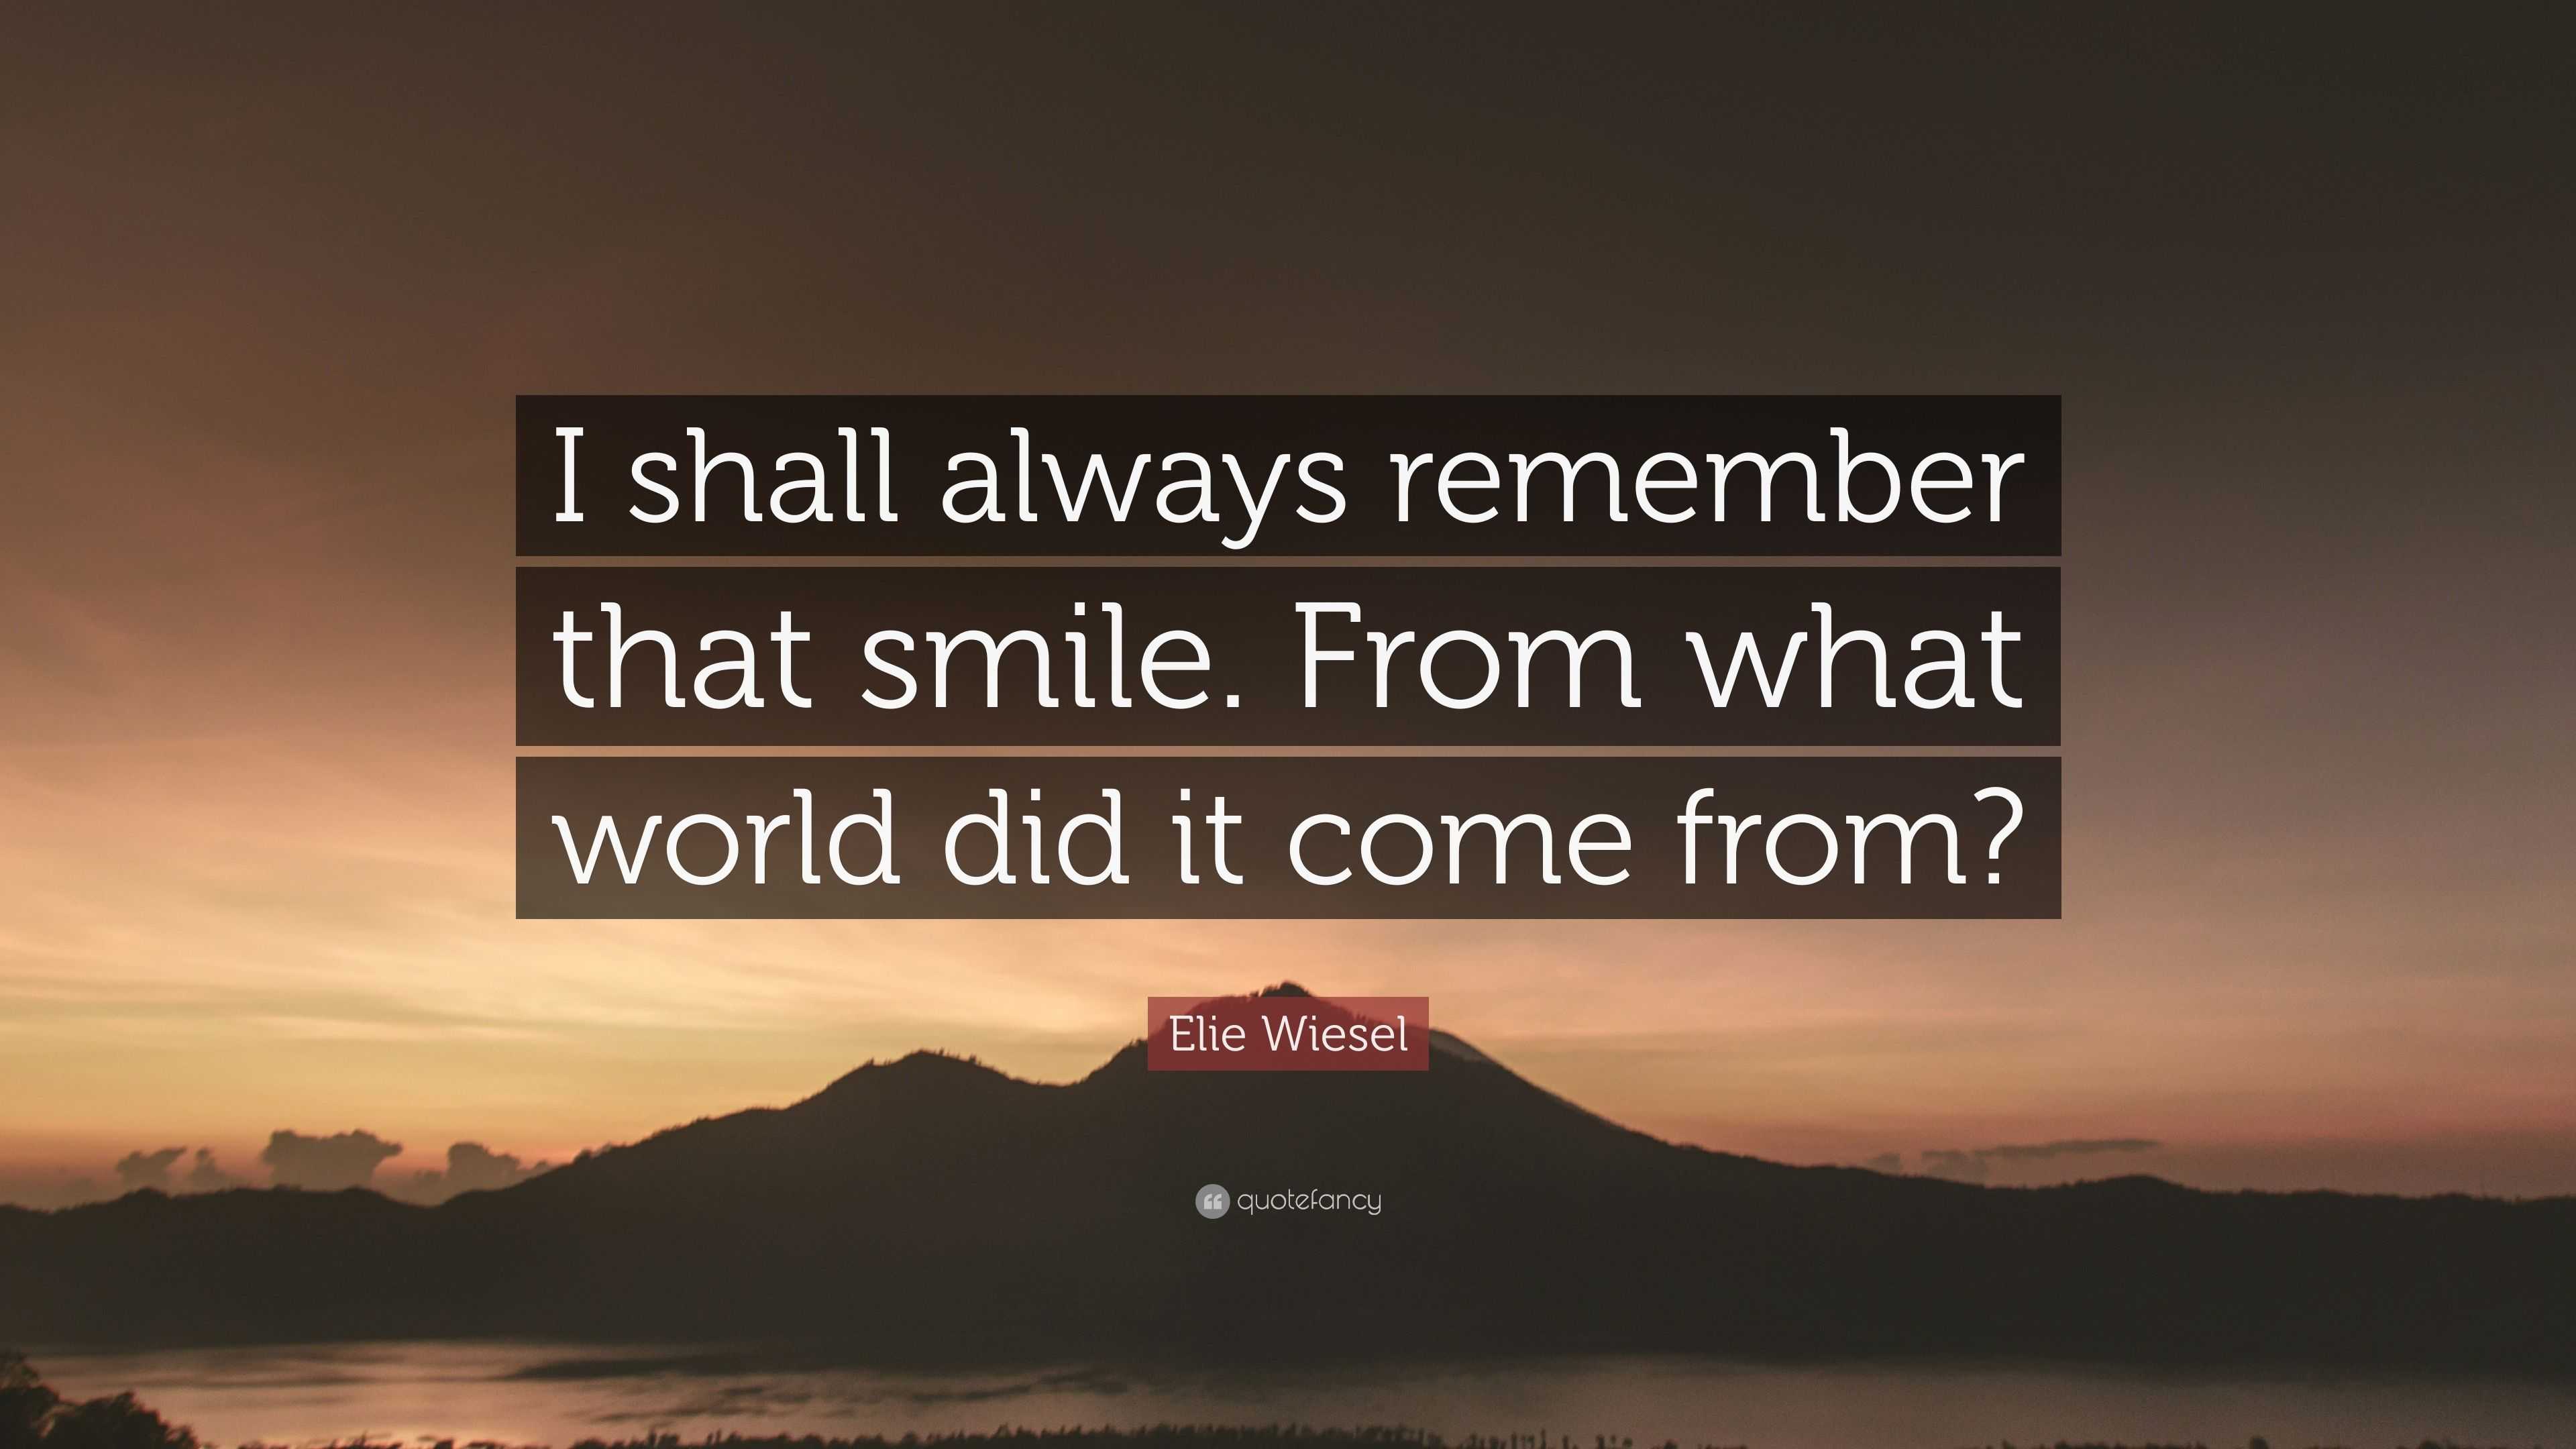 Elie Wiesel Quote: “I shall always remember that smile. From what world